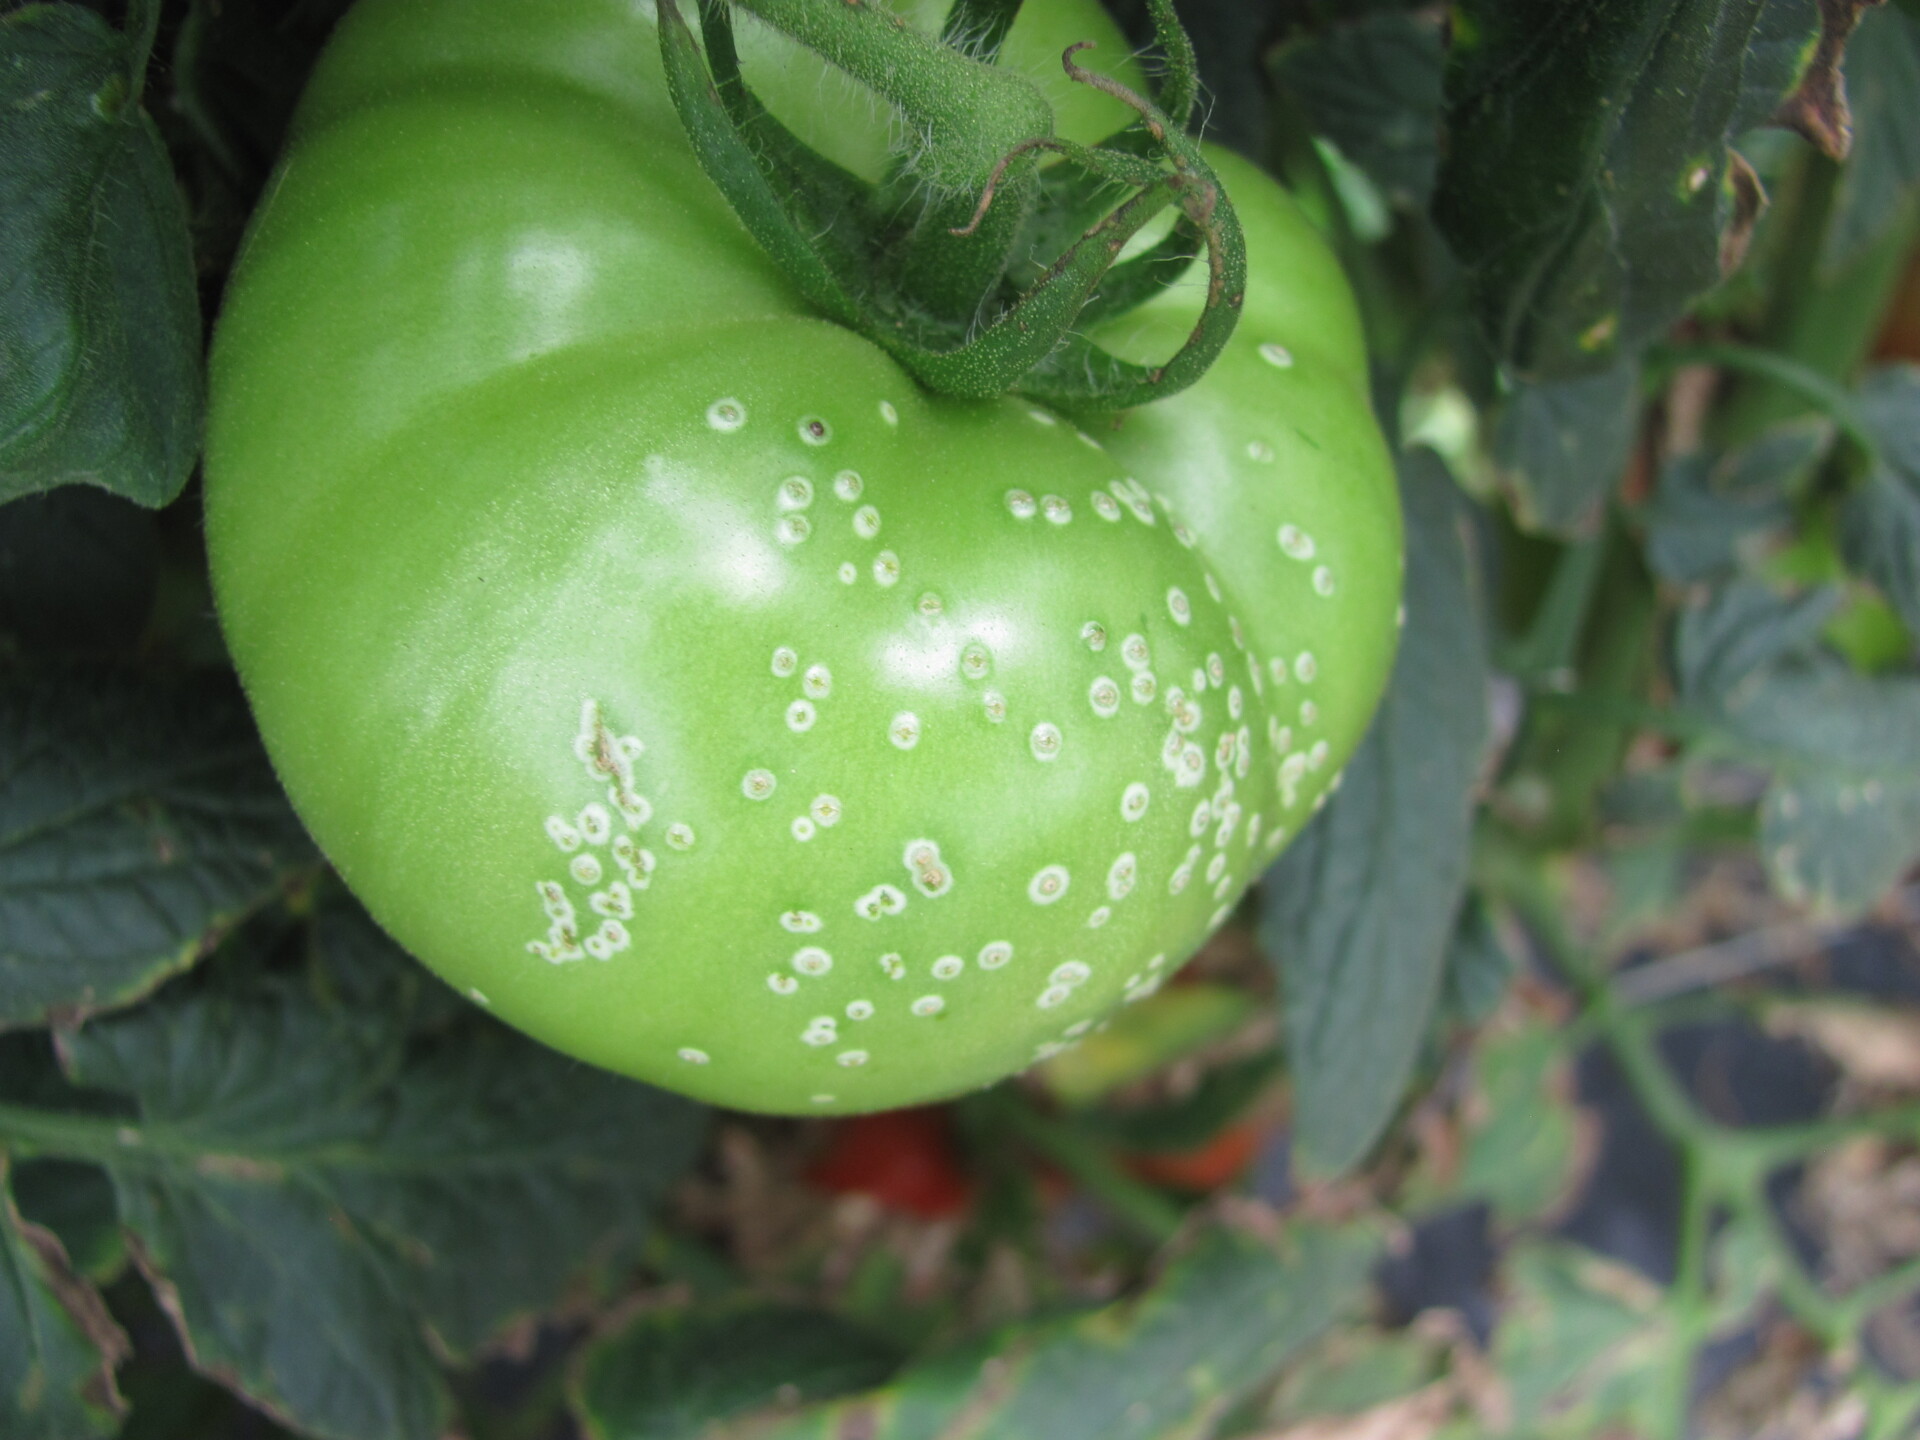 Bird’s eye spot infection on tomato fruit as a result of infection with bacterial canker. This symptom may not necessarily occur.